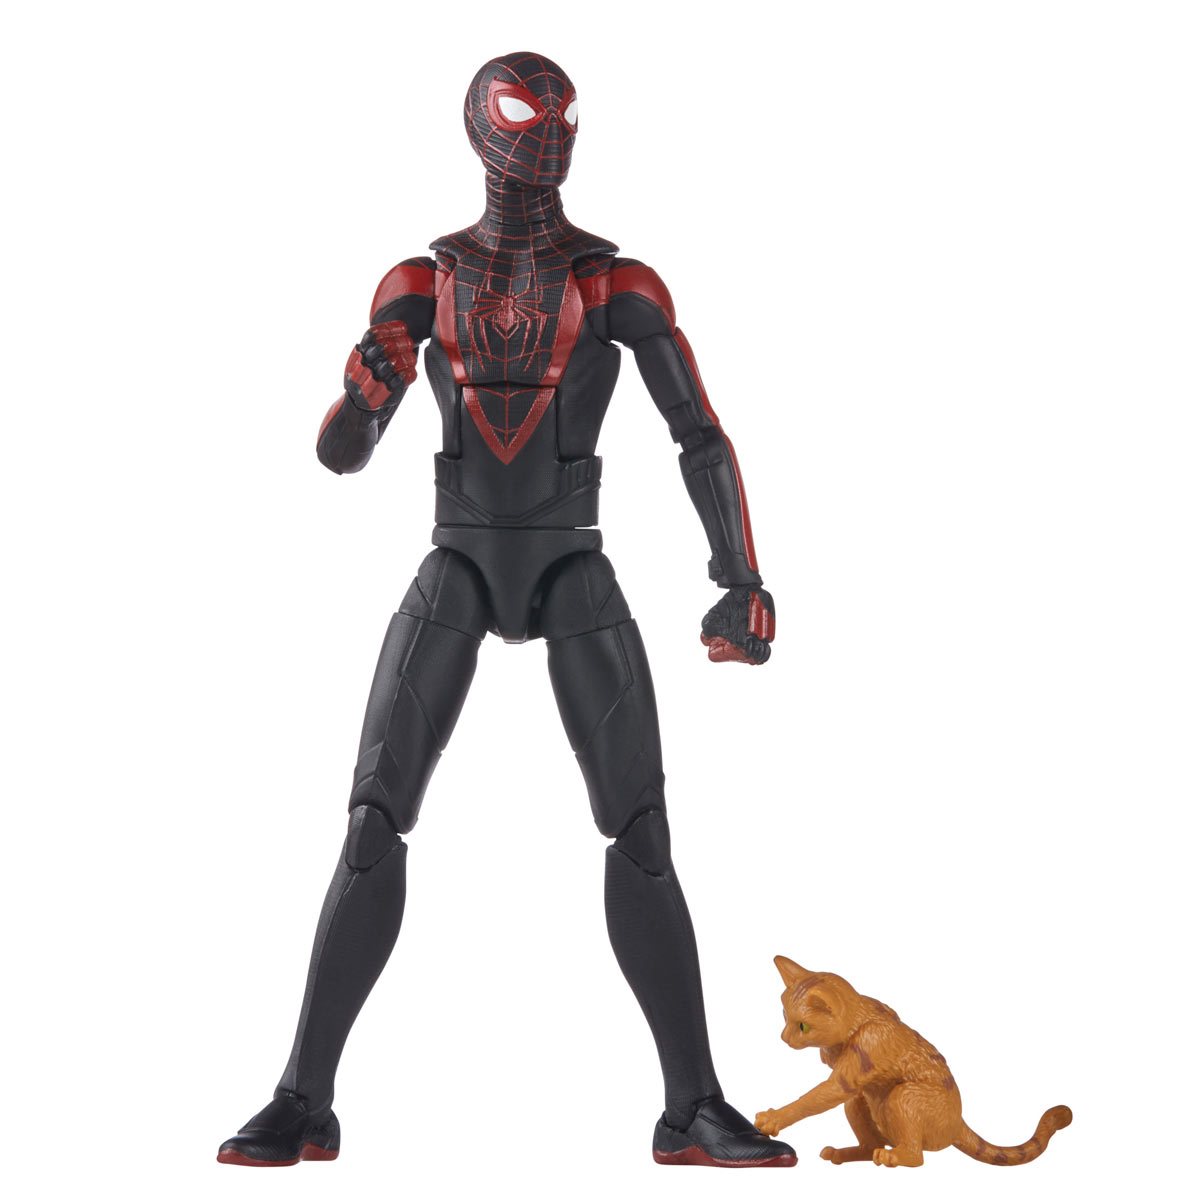  Spider-Man Marvel Legends Series Gamerverse Miles Morales  6-inch Collectible Action Figure Toy, 7 Accessories and 1 Build-A-Figure  Part(s) : CDs & Vinyl